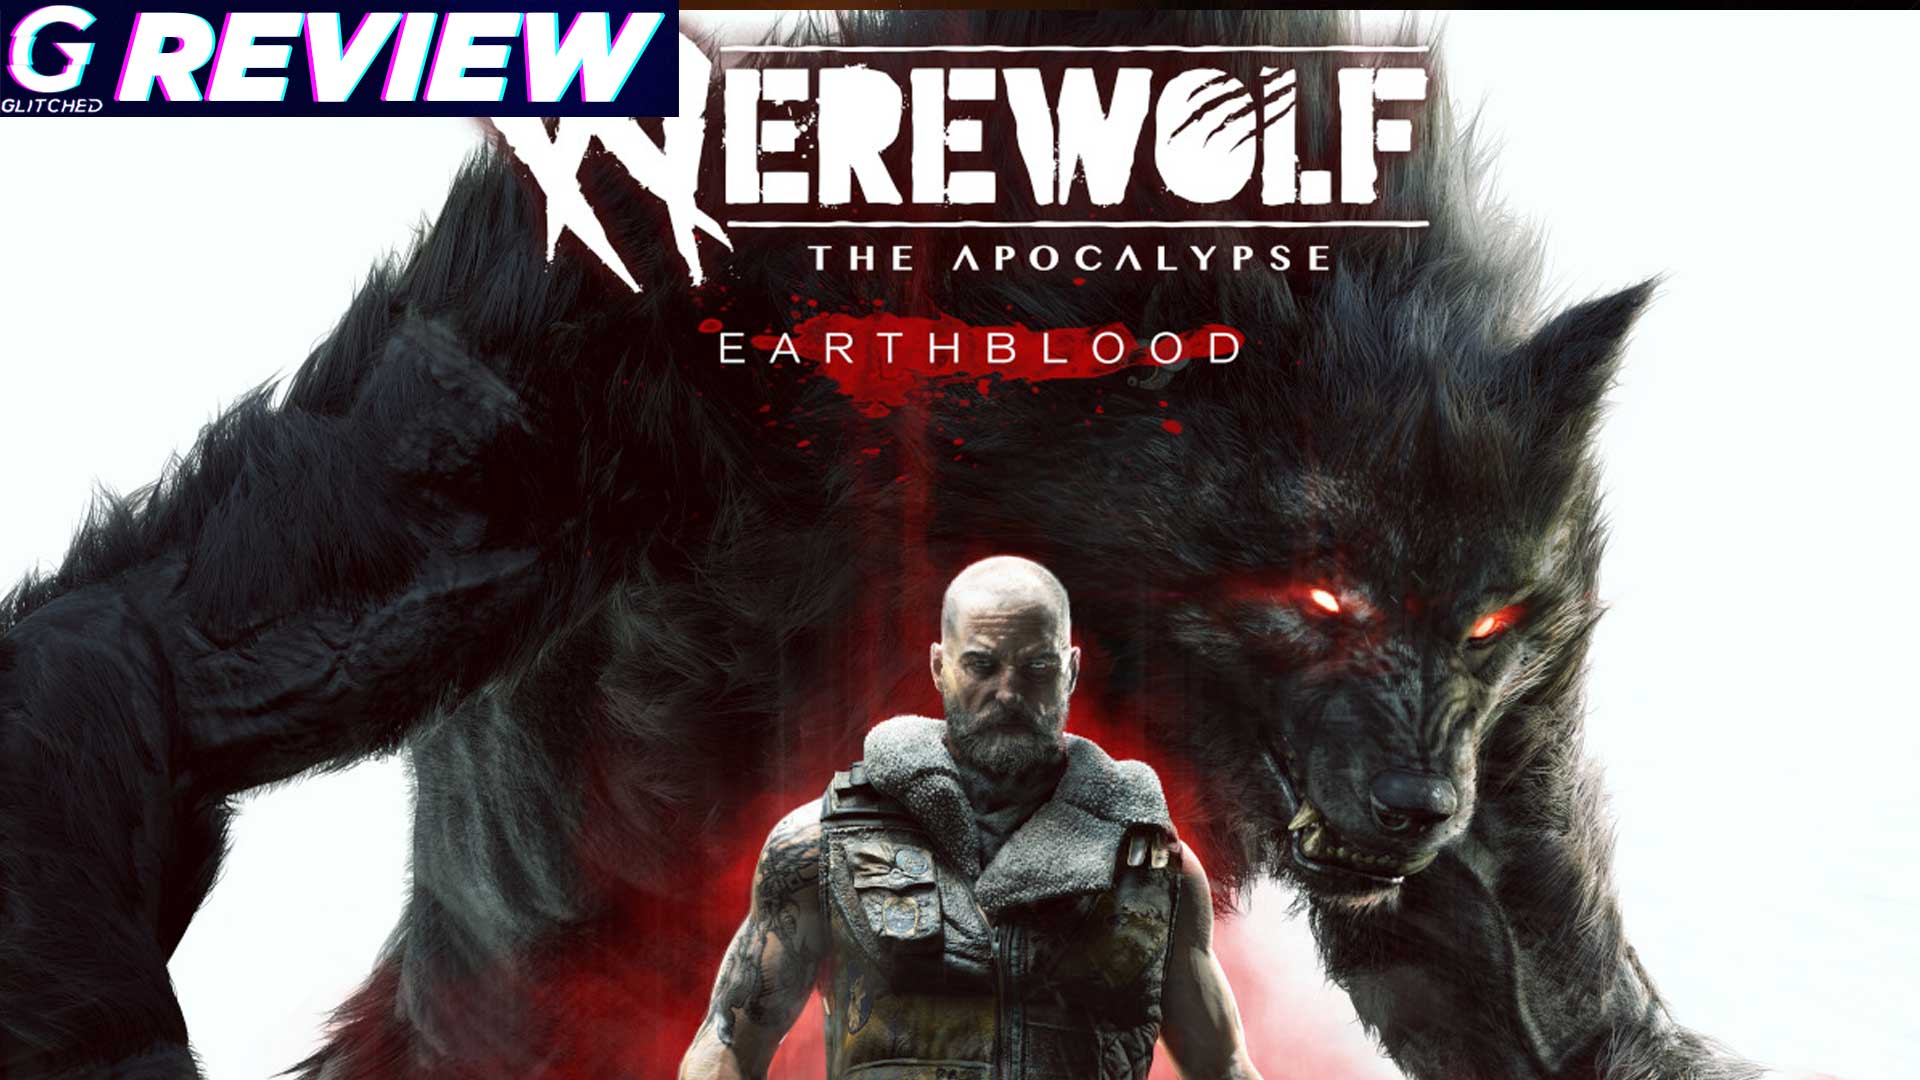 Werewolf: The Apocalypse – Earthblood Review